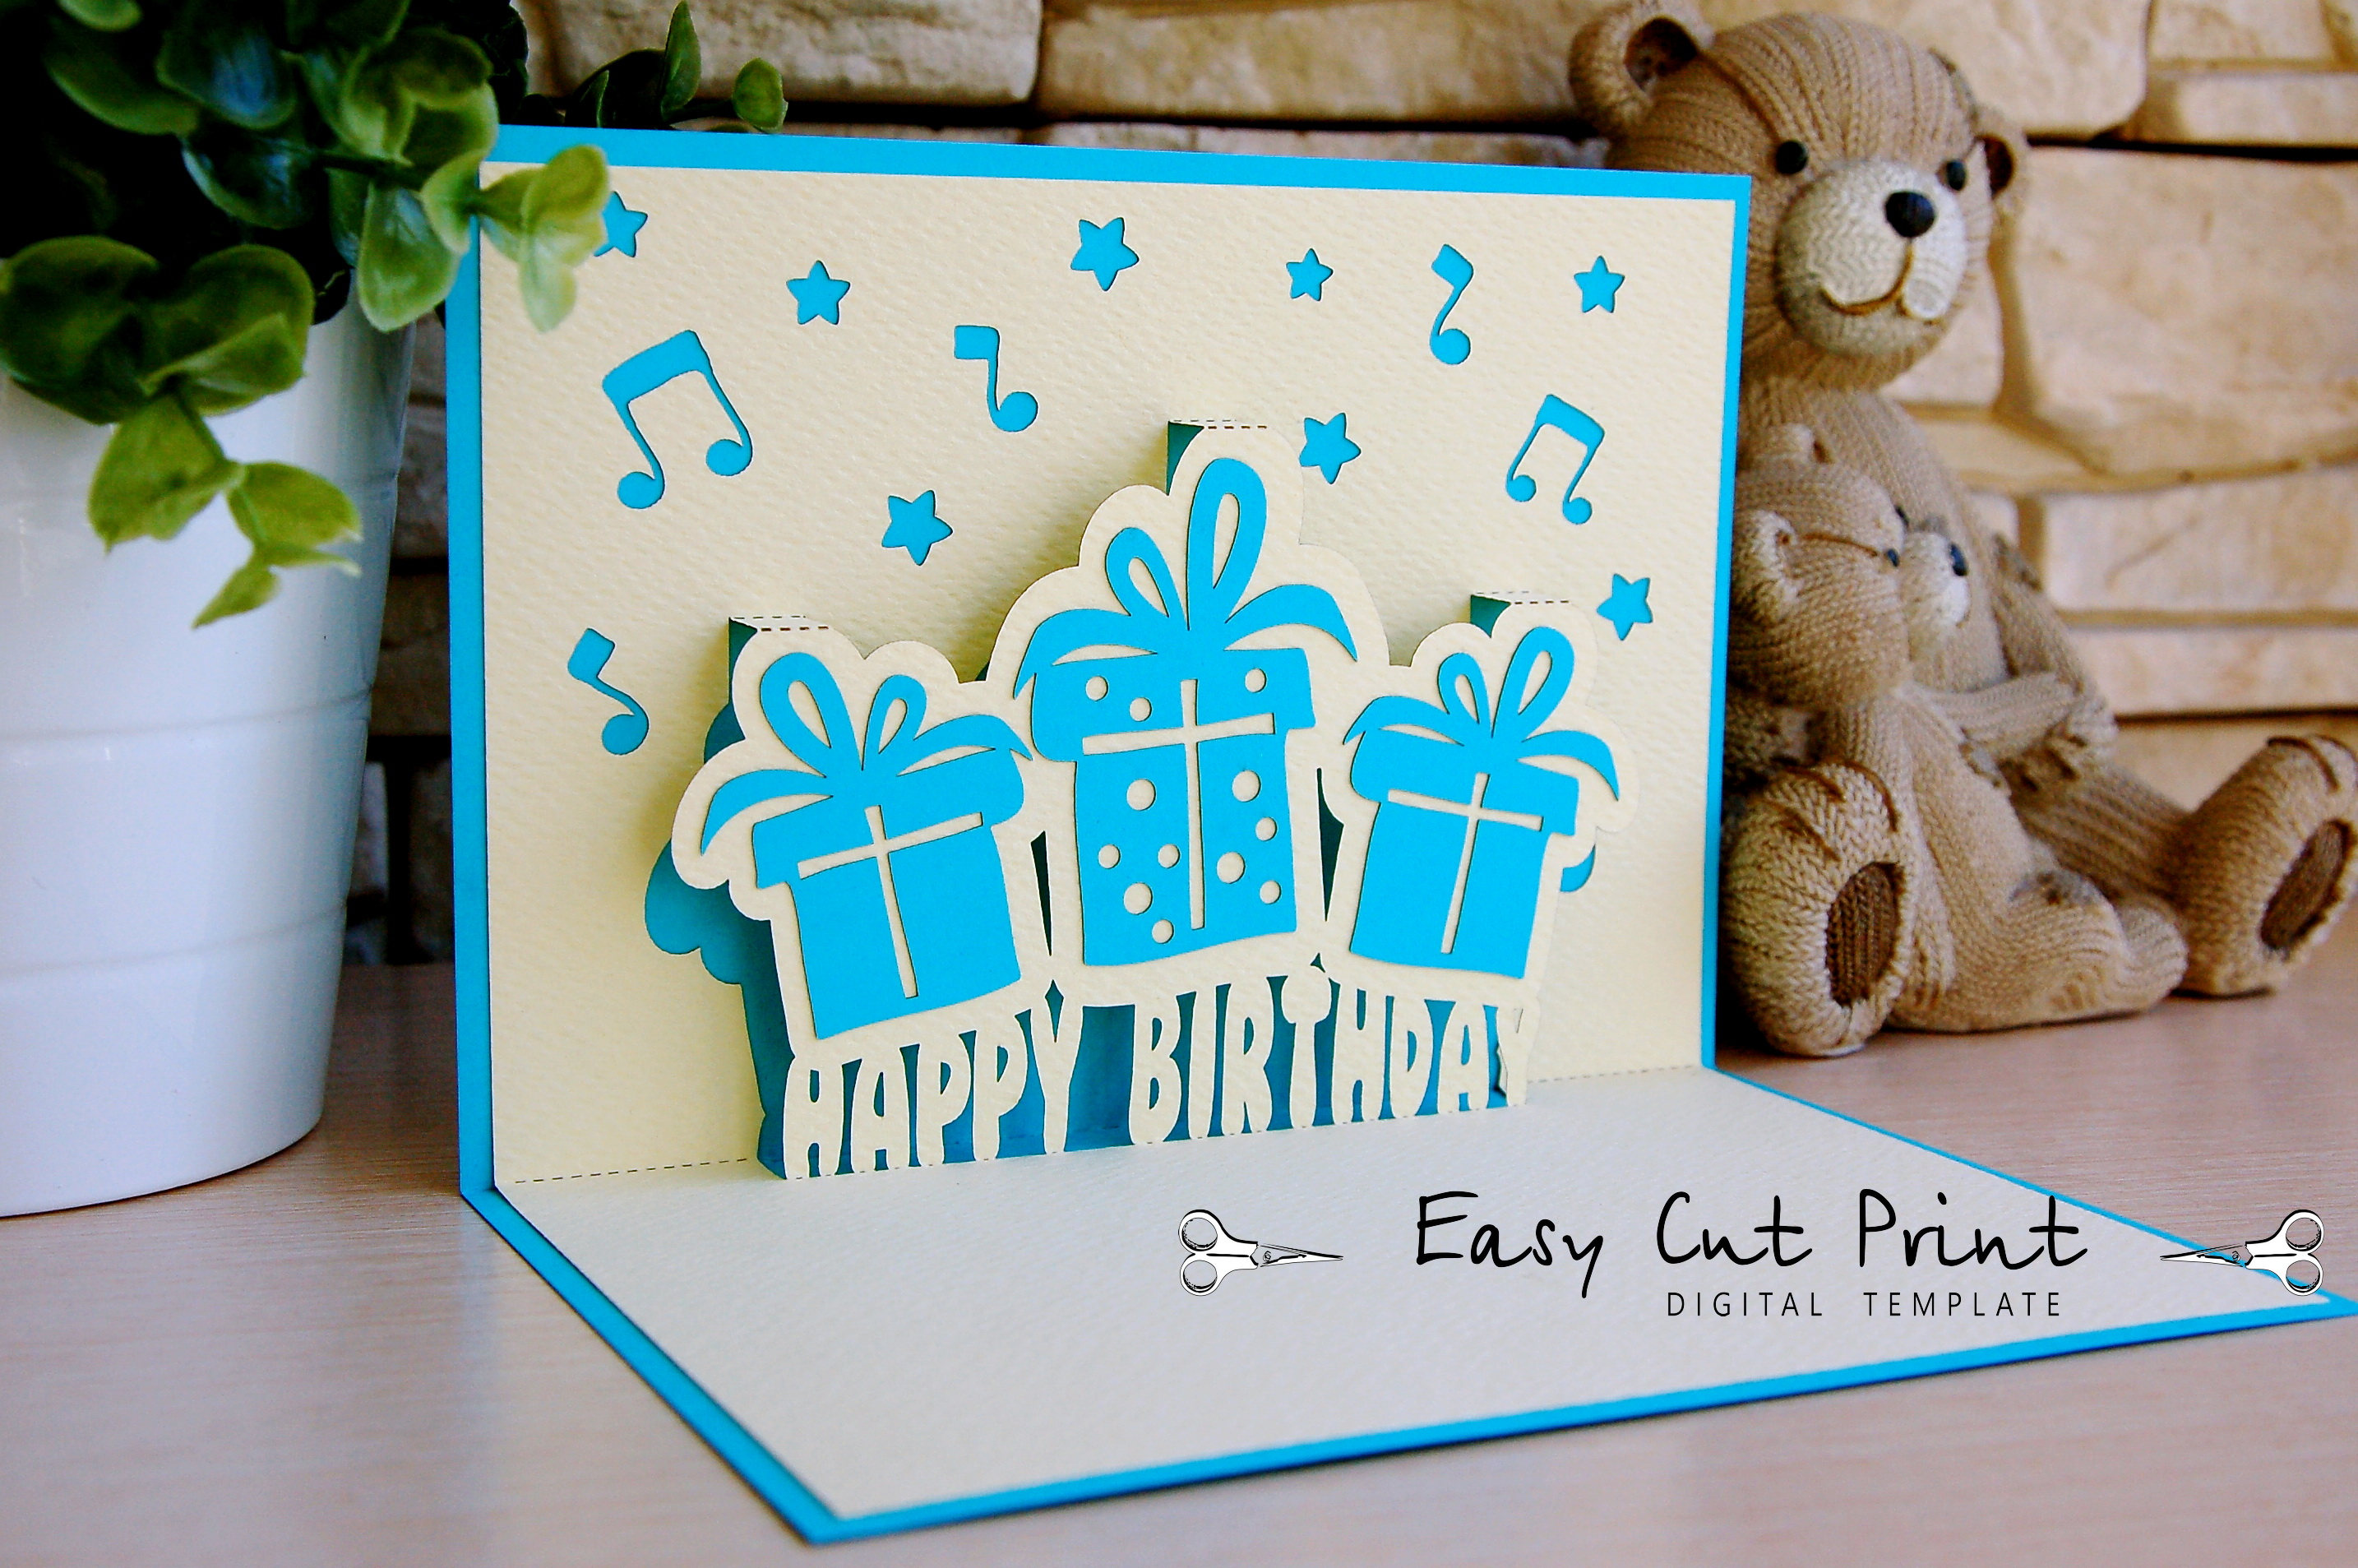 Download Happy birthday 3D gift pop up Card Laser cut SVG DXF CDR